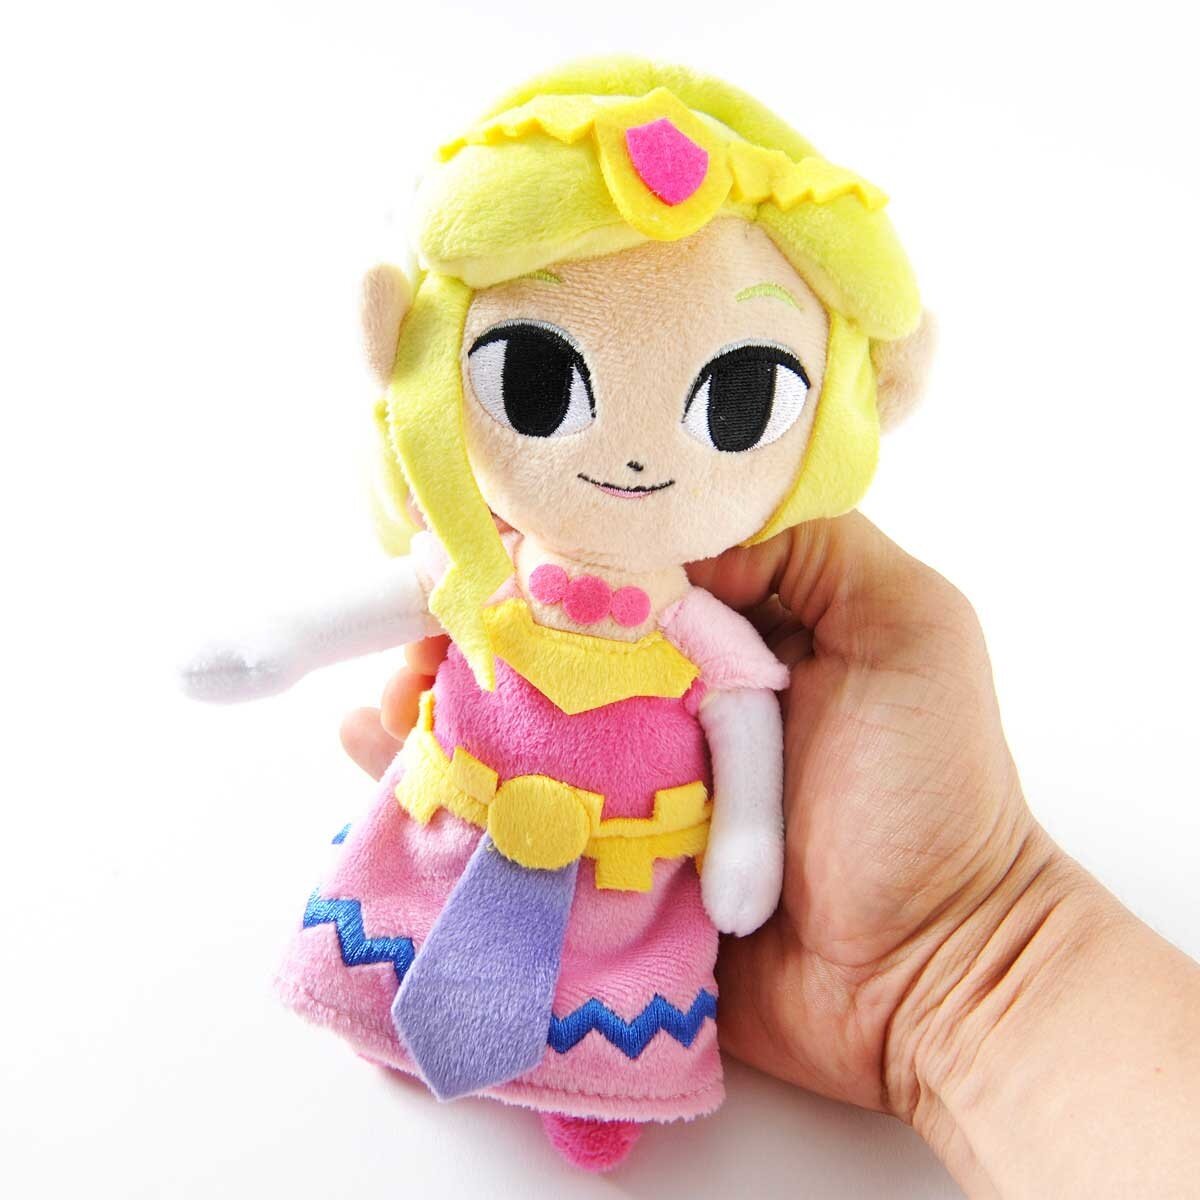 These Zelda plush will bring back all your 'Wind Waker' feels